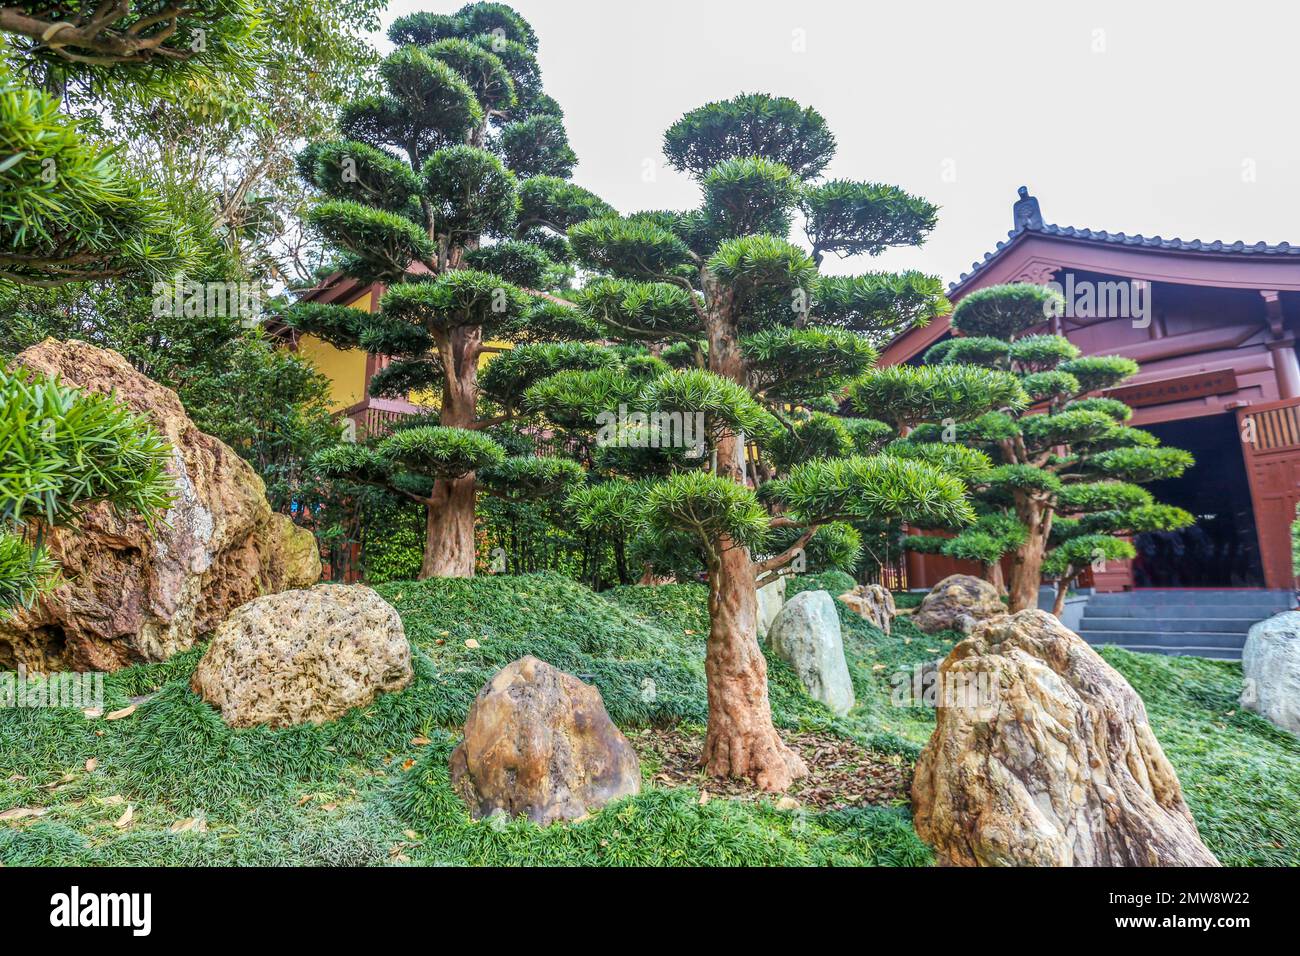 Superb View of the rocks (Taihu stone)  in Nan Lian Park with idyllic topiary podocarpus and pine trees and ophiopogon japonicus as grass. Evergreen p Stock Photo